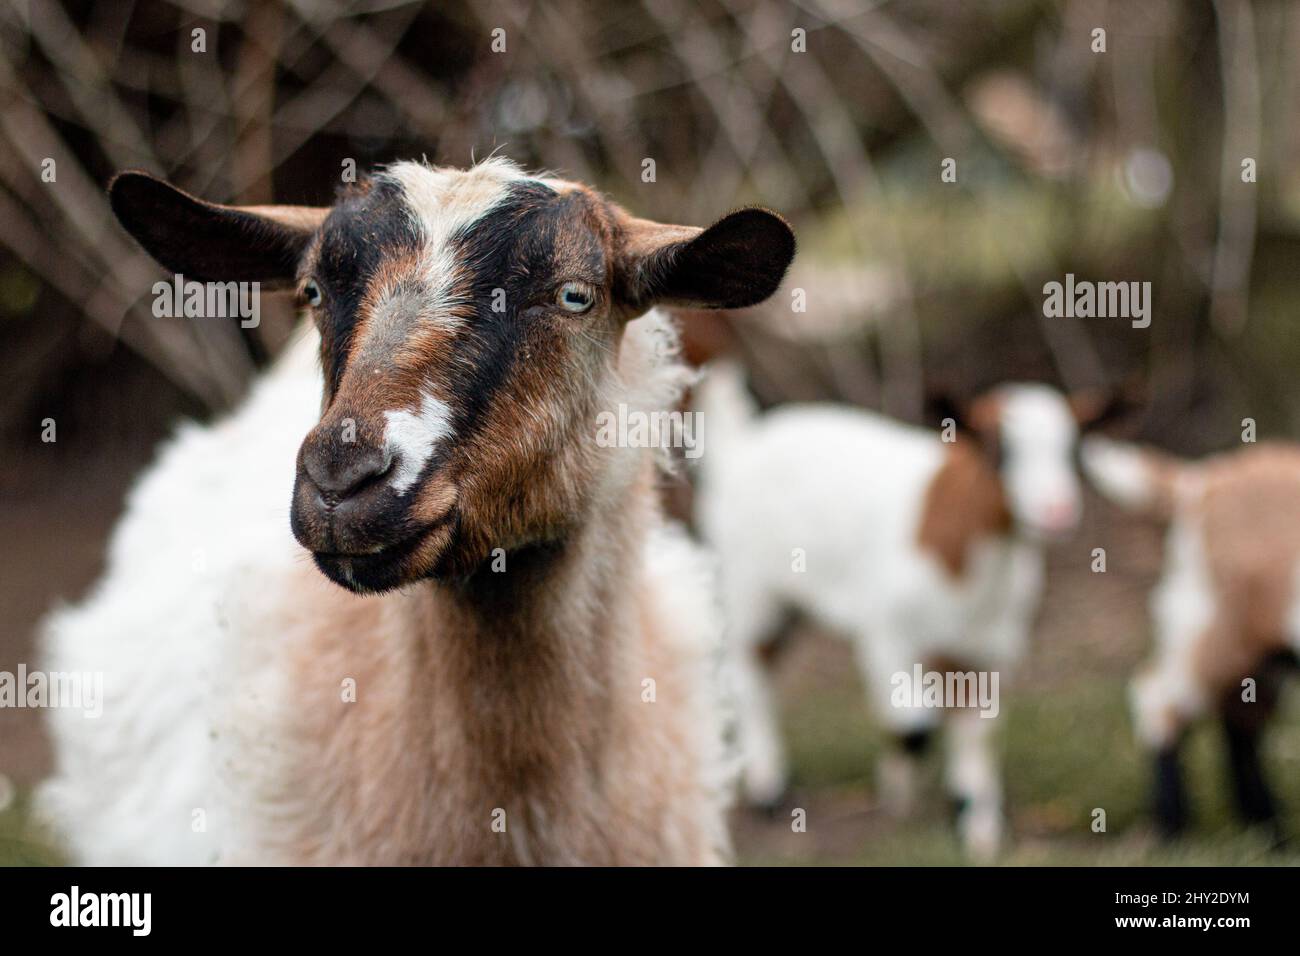 Close-up selective focus shot of a goat standing in the farm on a blurred background Stock Photo